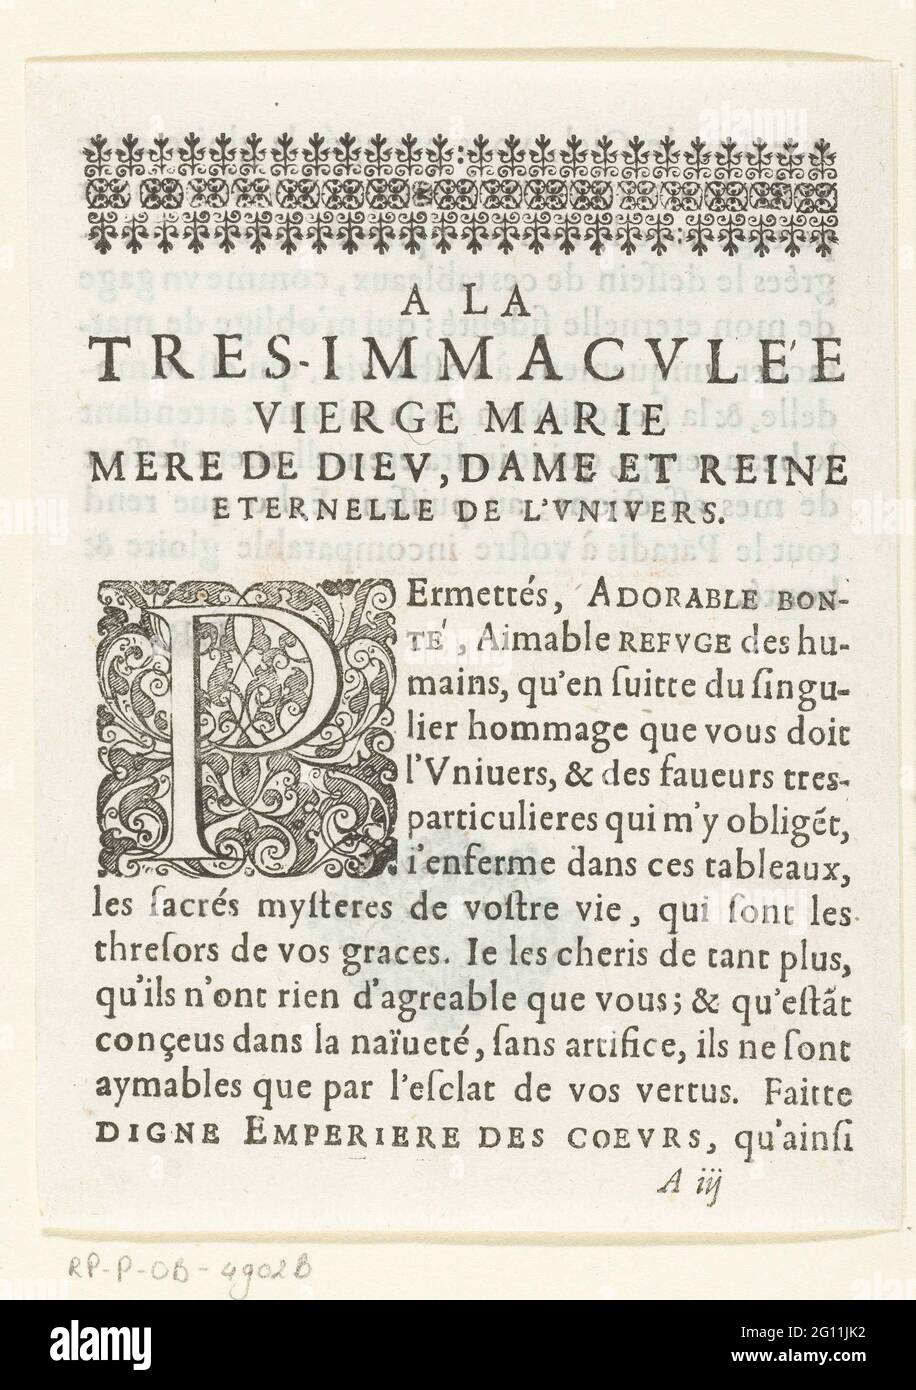 Hymn on Mary belonging to the logo series 'Life of Mary in Emblems'; A la Tres-immaculée Vierge Marie Mere de Dieu, Dame et Reine Eternelle de l'Univers; Life of Mary in emblems. A loving text, focused on Mary, stated in Frans prose. This sheet (printed on both sides) is part of the first state of the 'Life of Maria's Life in Emblem', which includes two hymns and 26 emblems in addition to a title page and this hymn. Stock Photo